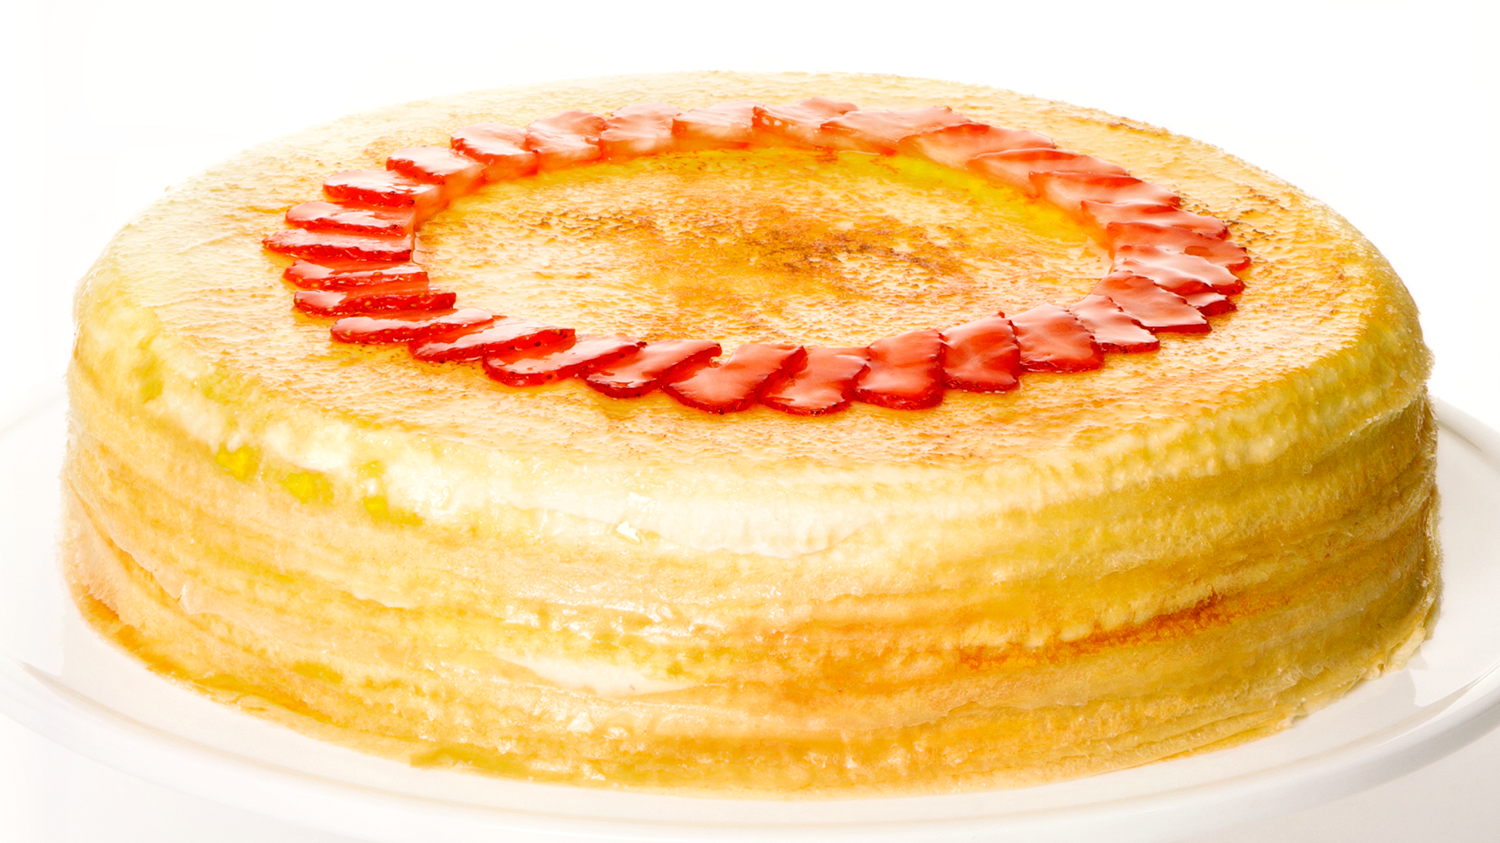 Lady M introduces Guava Mille Crêpes cake | Snack Food & Wholesale Bakery